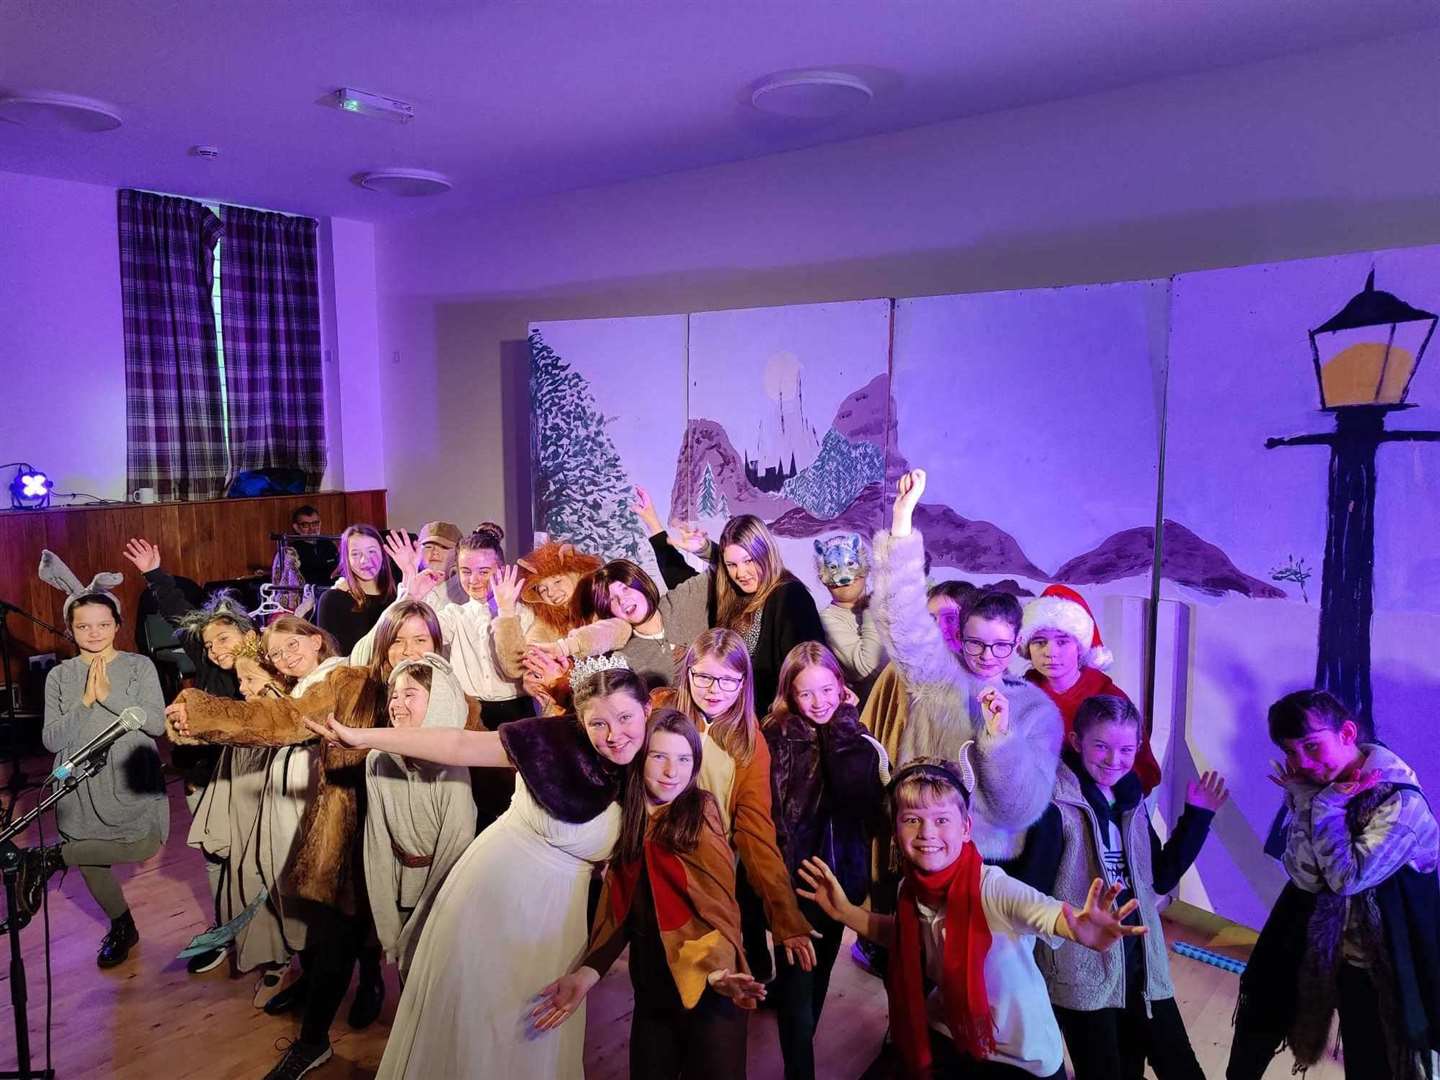 Members of Dornoch Cathedral Youth Theatre Group gave "outstanding" performances in The Lion, the Witch and the Wardrobe.